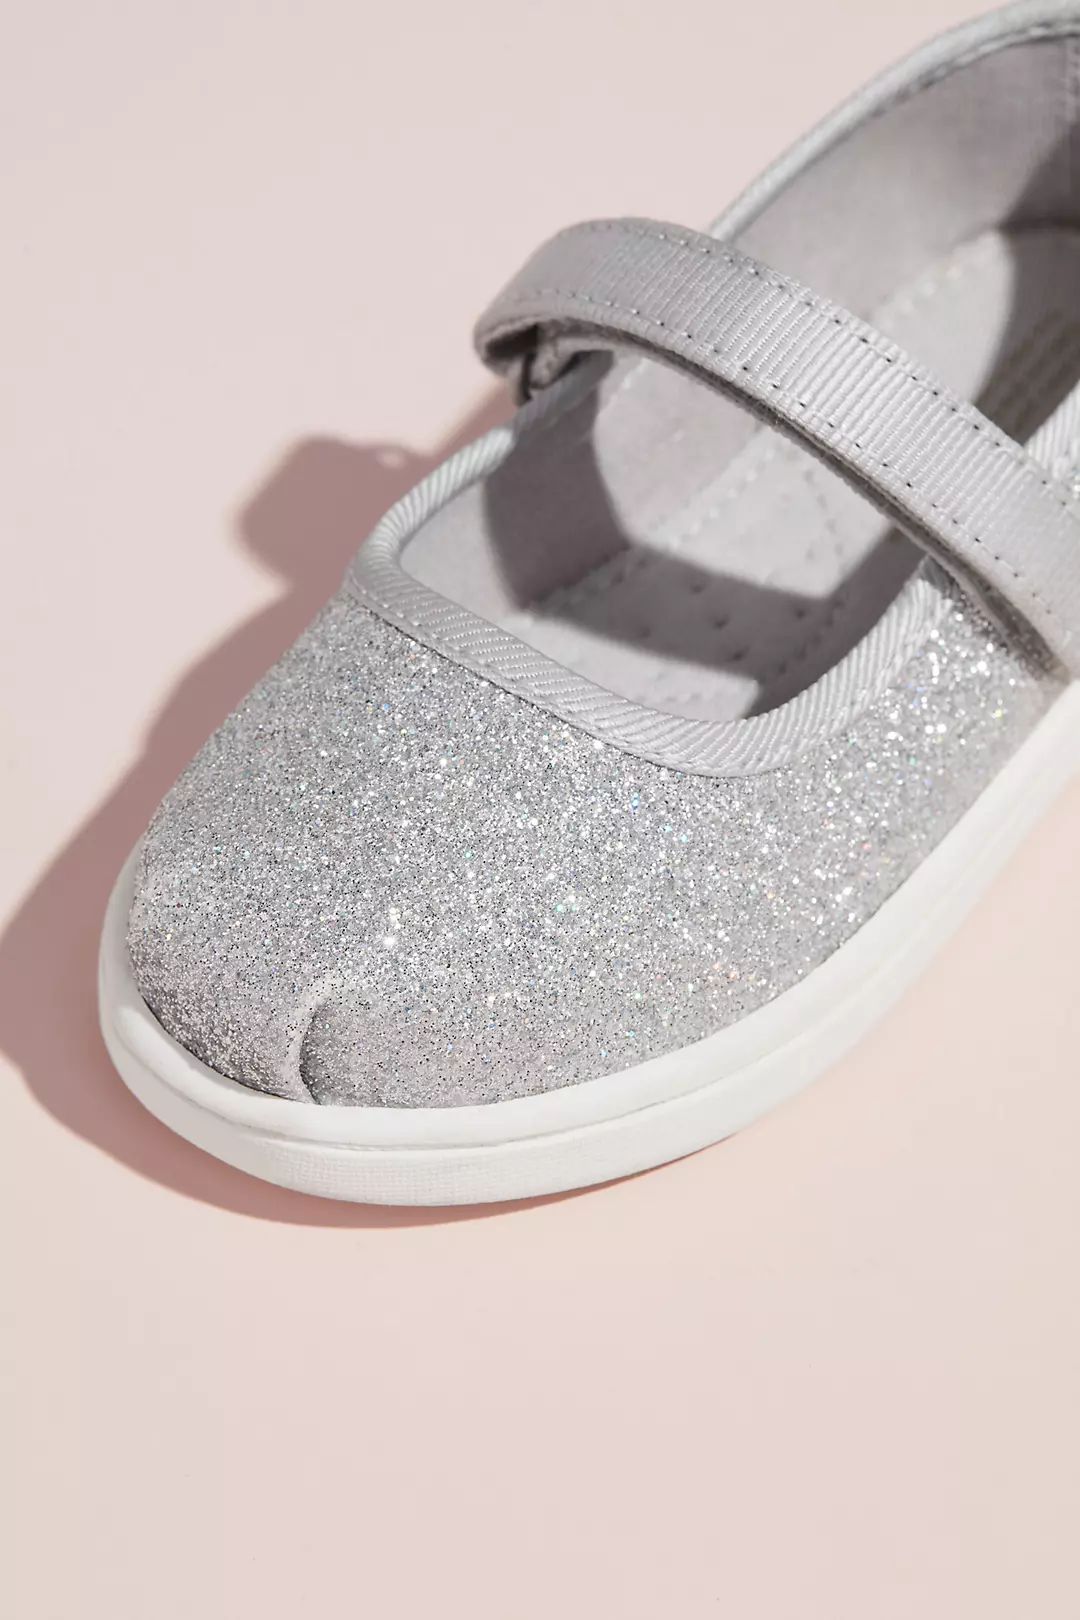 TOMS Girls Glitter Mary Janes Image 3